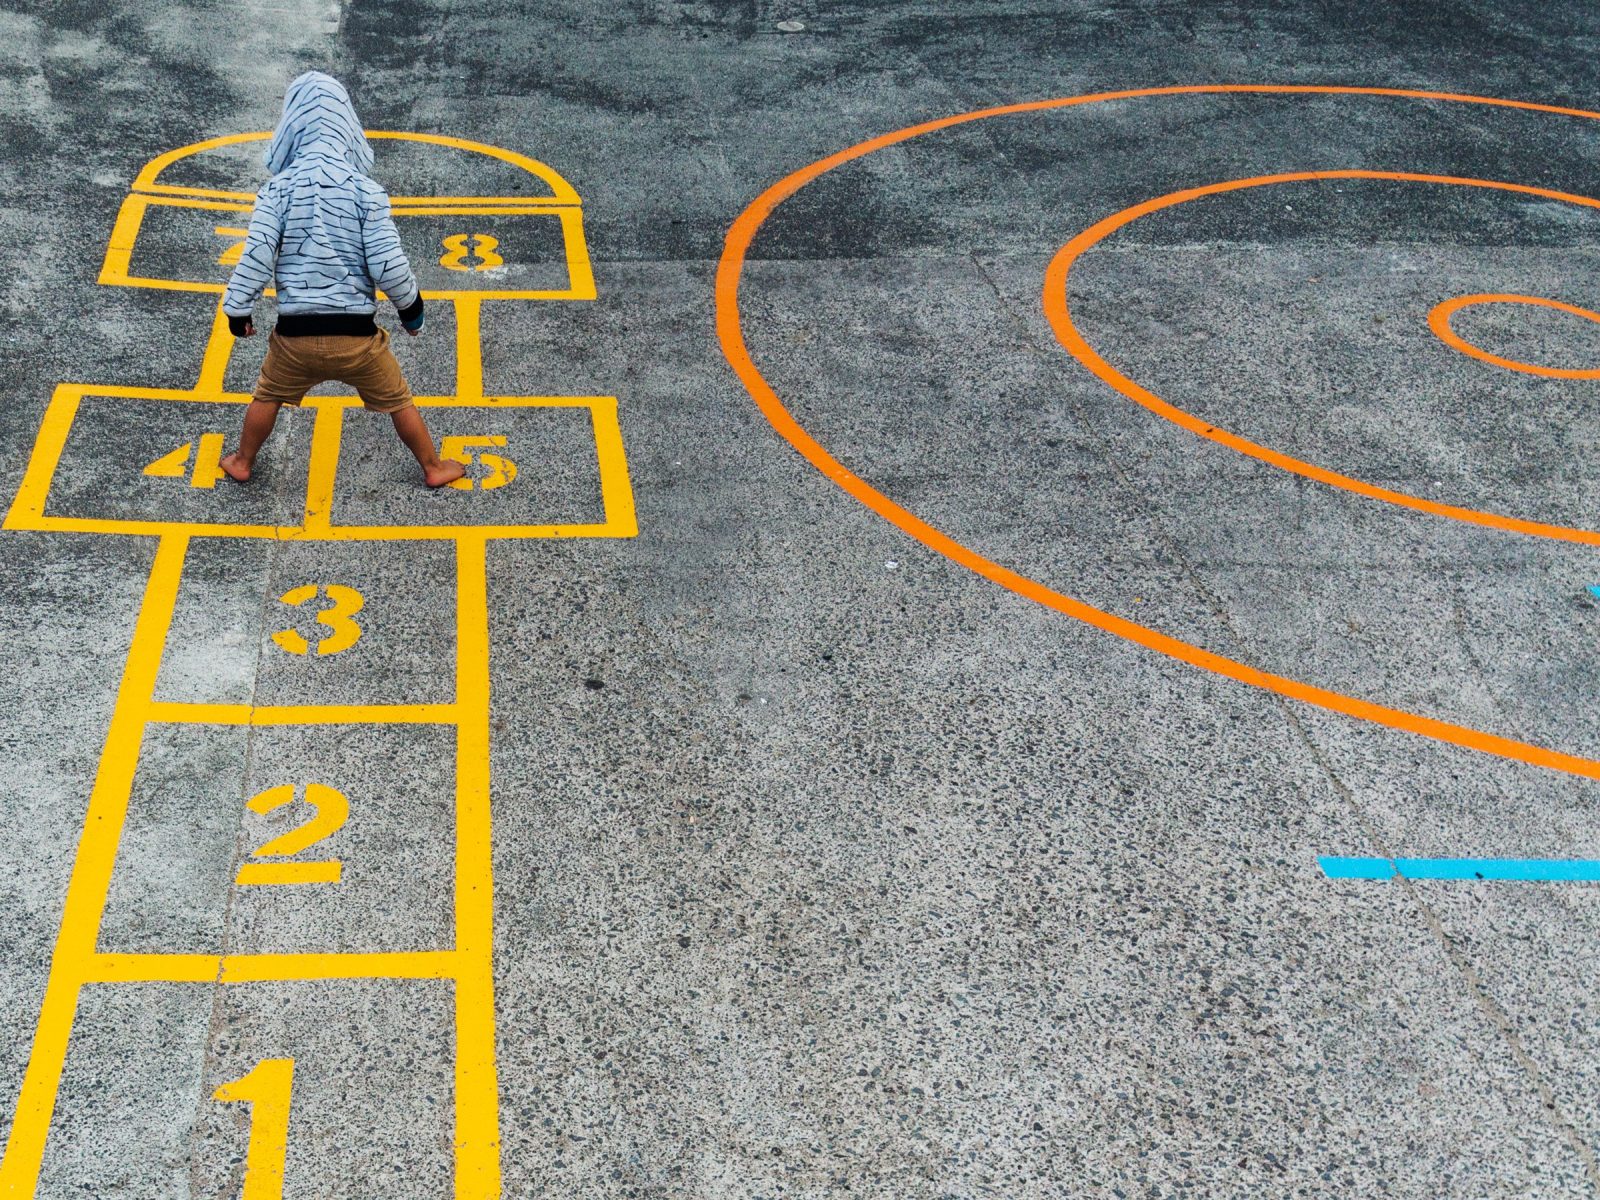 So You’re a Trivia Expert? Prove It by Answering All 22 of These True/False Questions Correctly Hopscotch